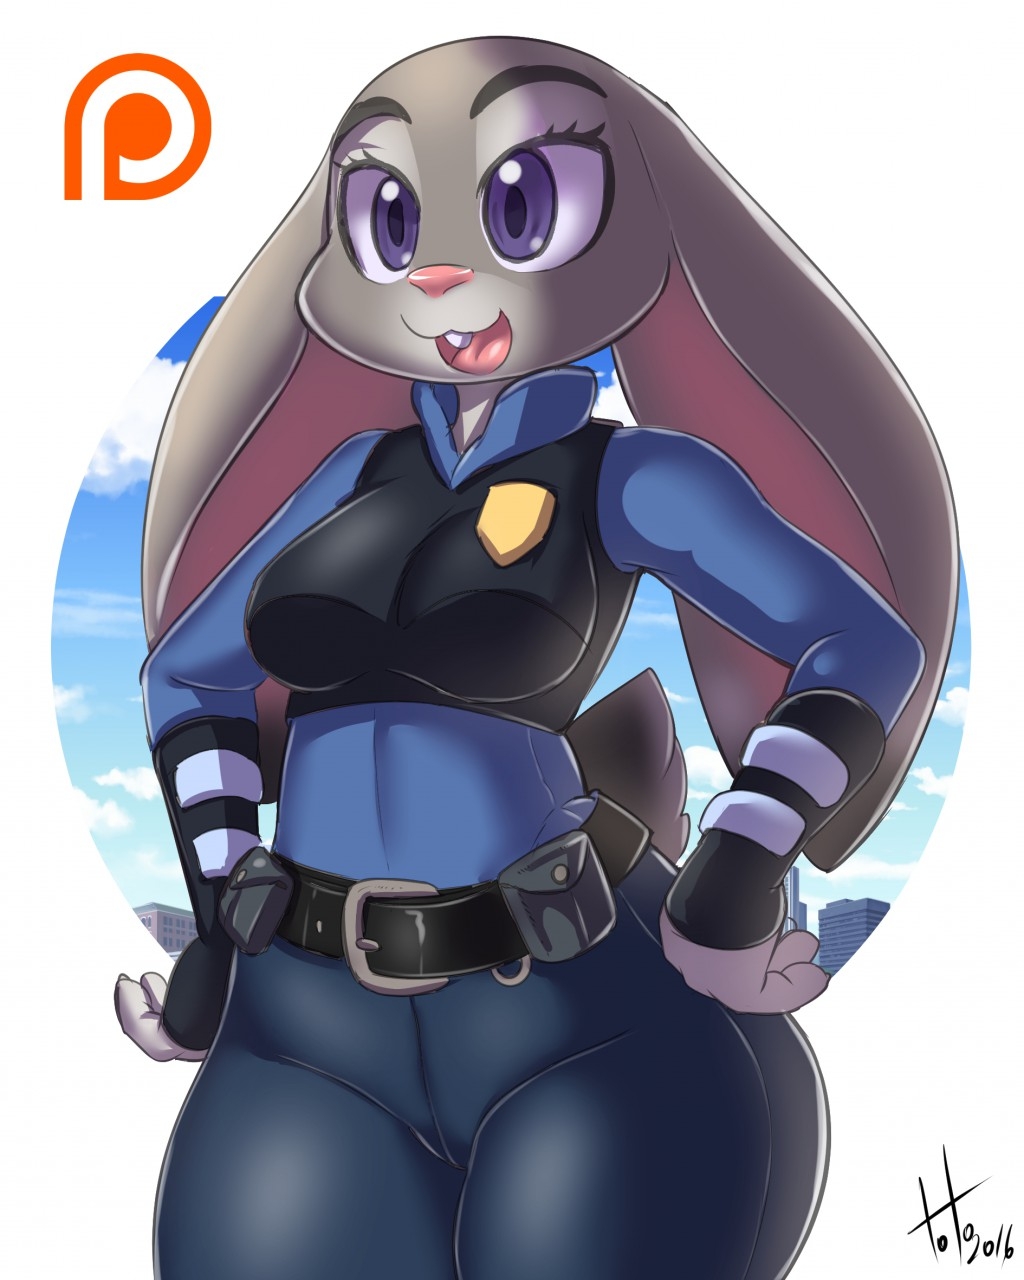 [Toto Draws] - Easter Cop Day Off - [Zootopia] - [Spanish] - Complete 17